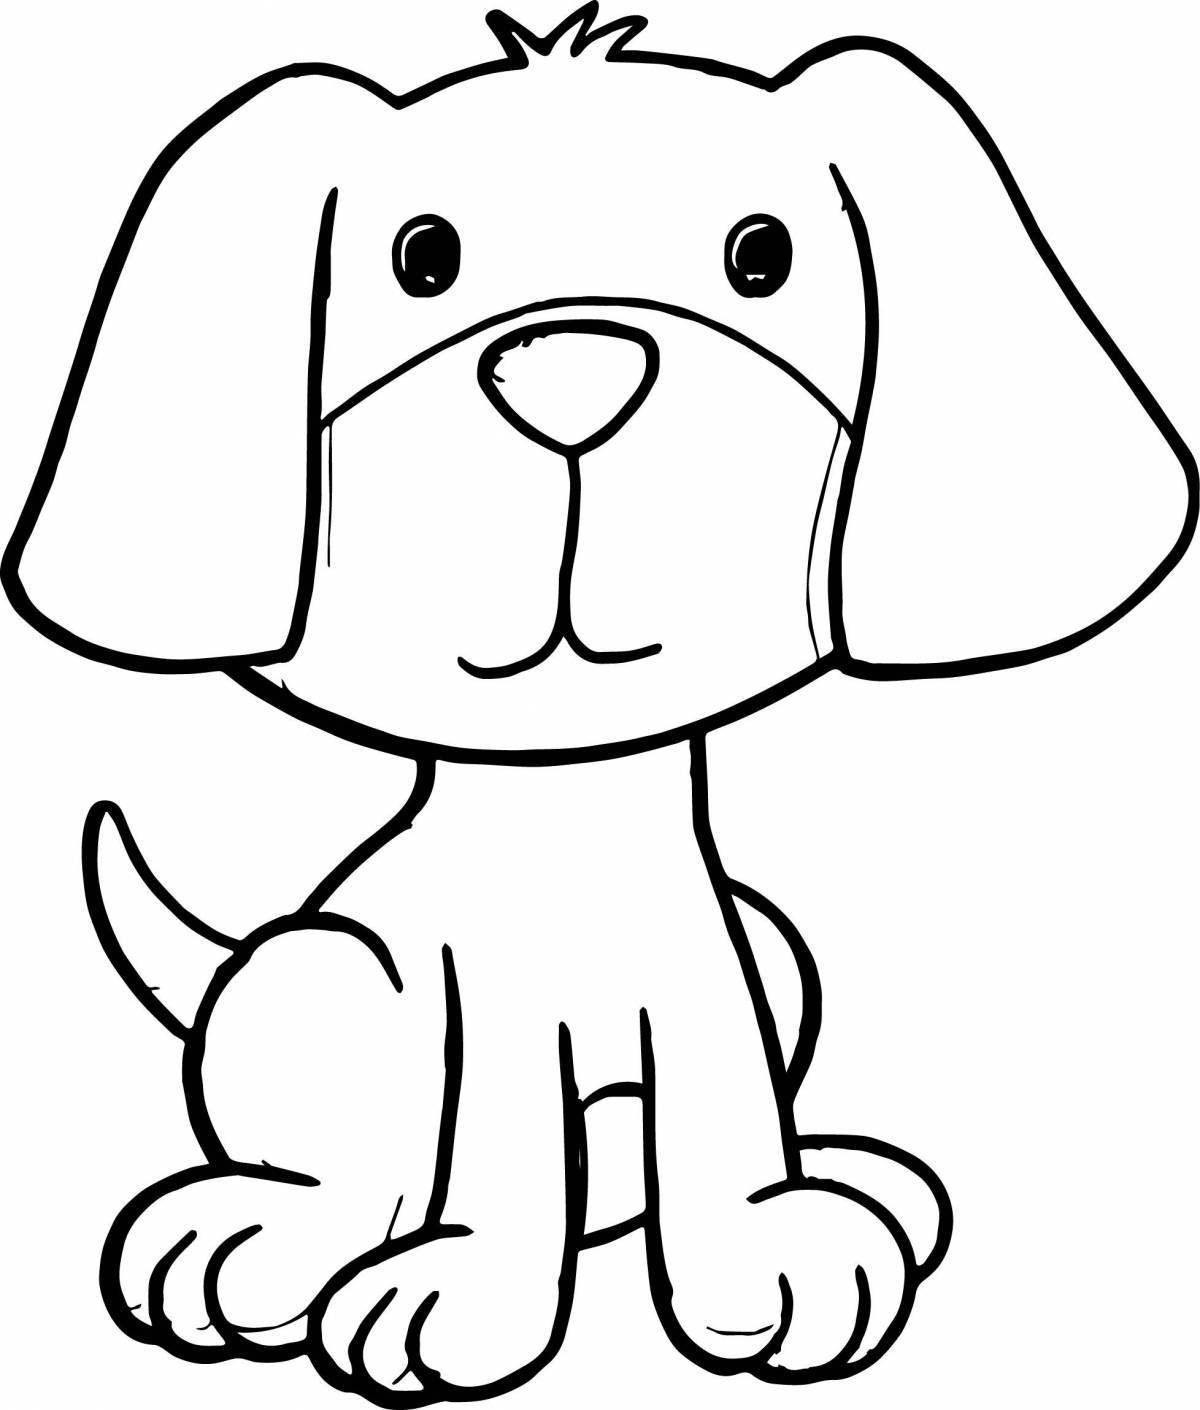 Great dog coloring book for beginners